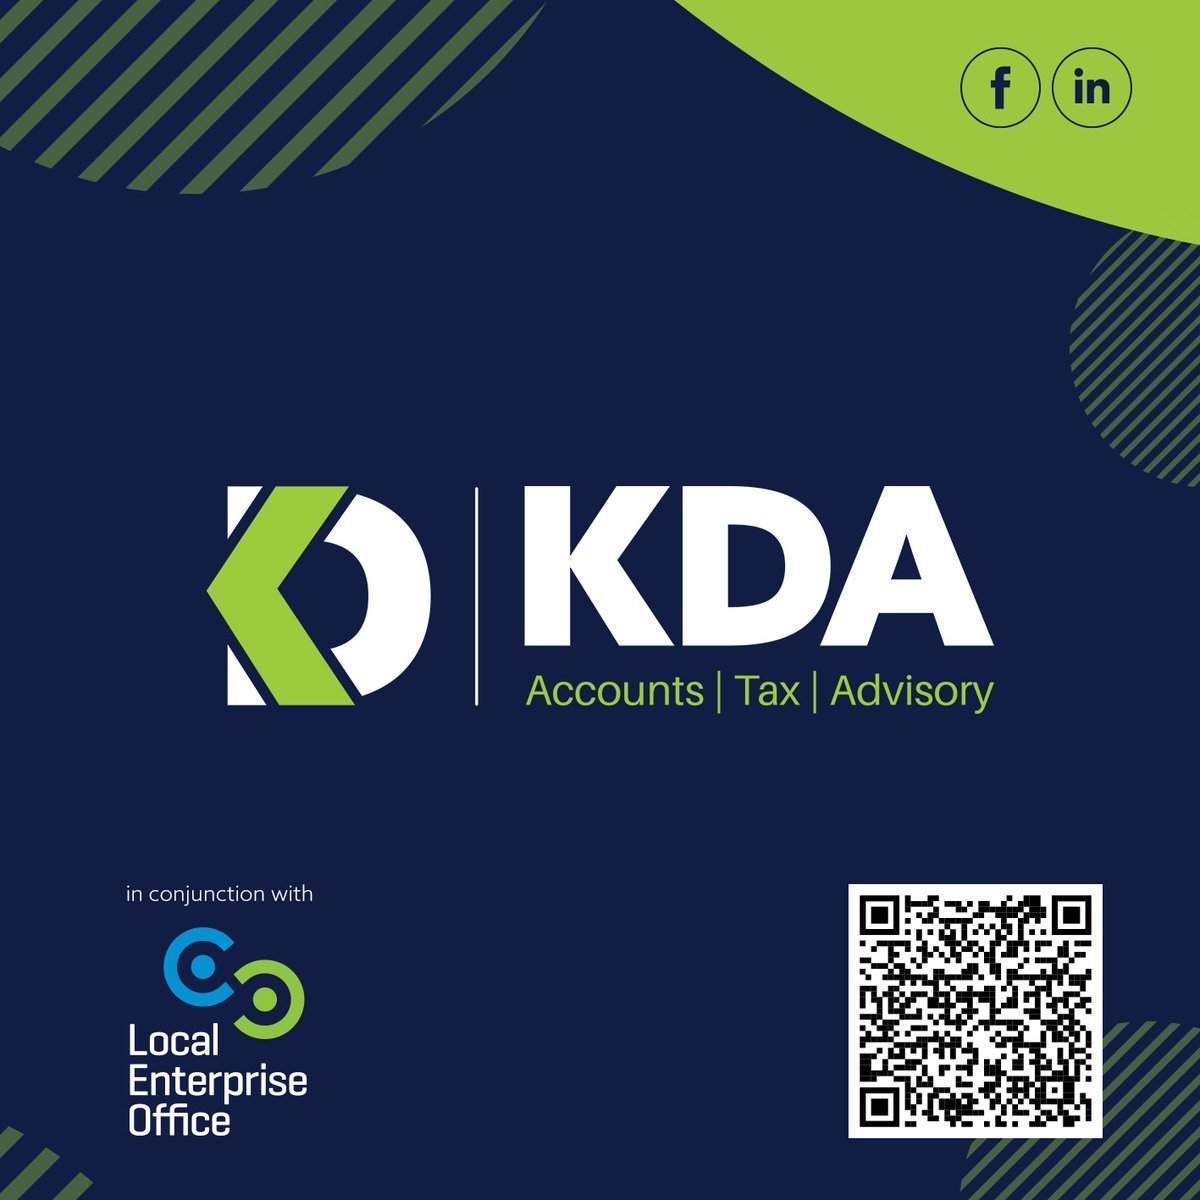 Join us at the KDA Succession Summit on April 25th at 7pm in the Amber Springs Hotel, Gorey. Discover practical advice and gain insights into creating tax & legally robust business exit strategies. Book Now: lnkd.in/eXwvydmd See you there! #SuccessionSummit #BusinessExit